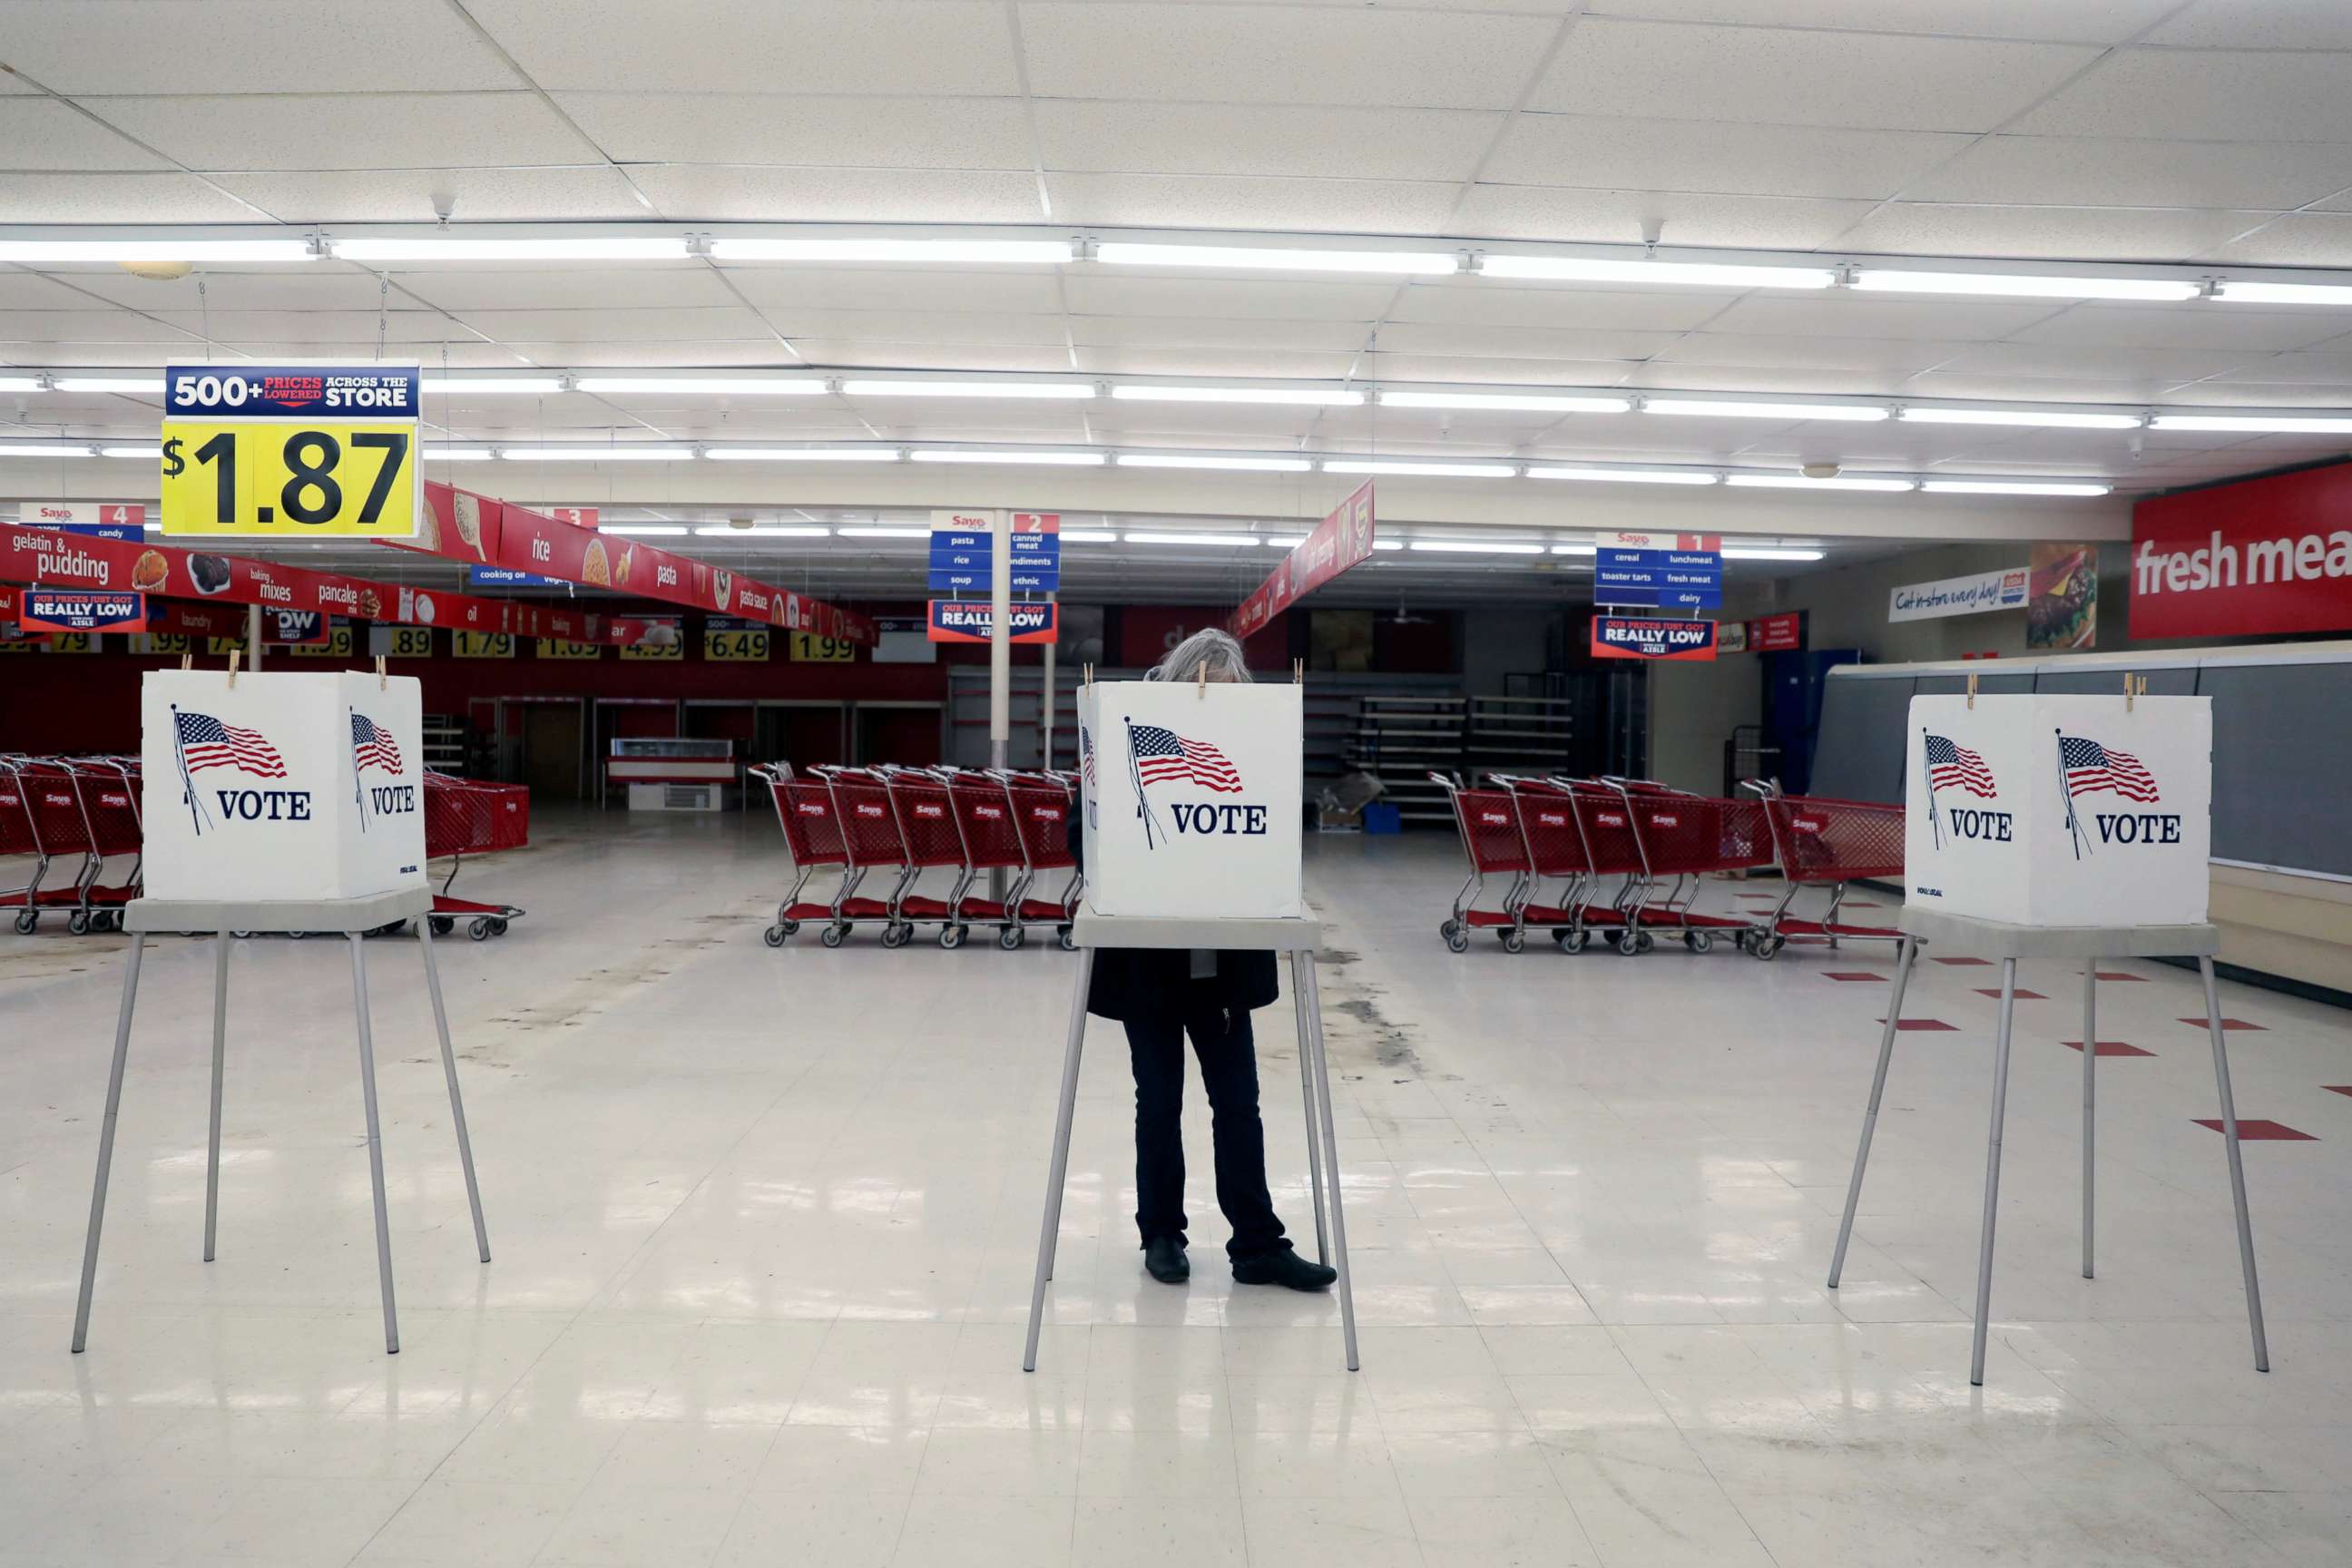 PHOTO: A voter fills out a ballot during the primary election in Ottawa, Ill., March 17, 2020. The polling station was relocated from a nearby nursing home to a former supermarket due to concerns over the outbreak of coronavirus.